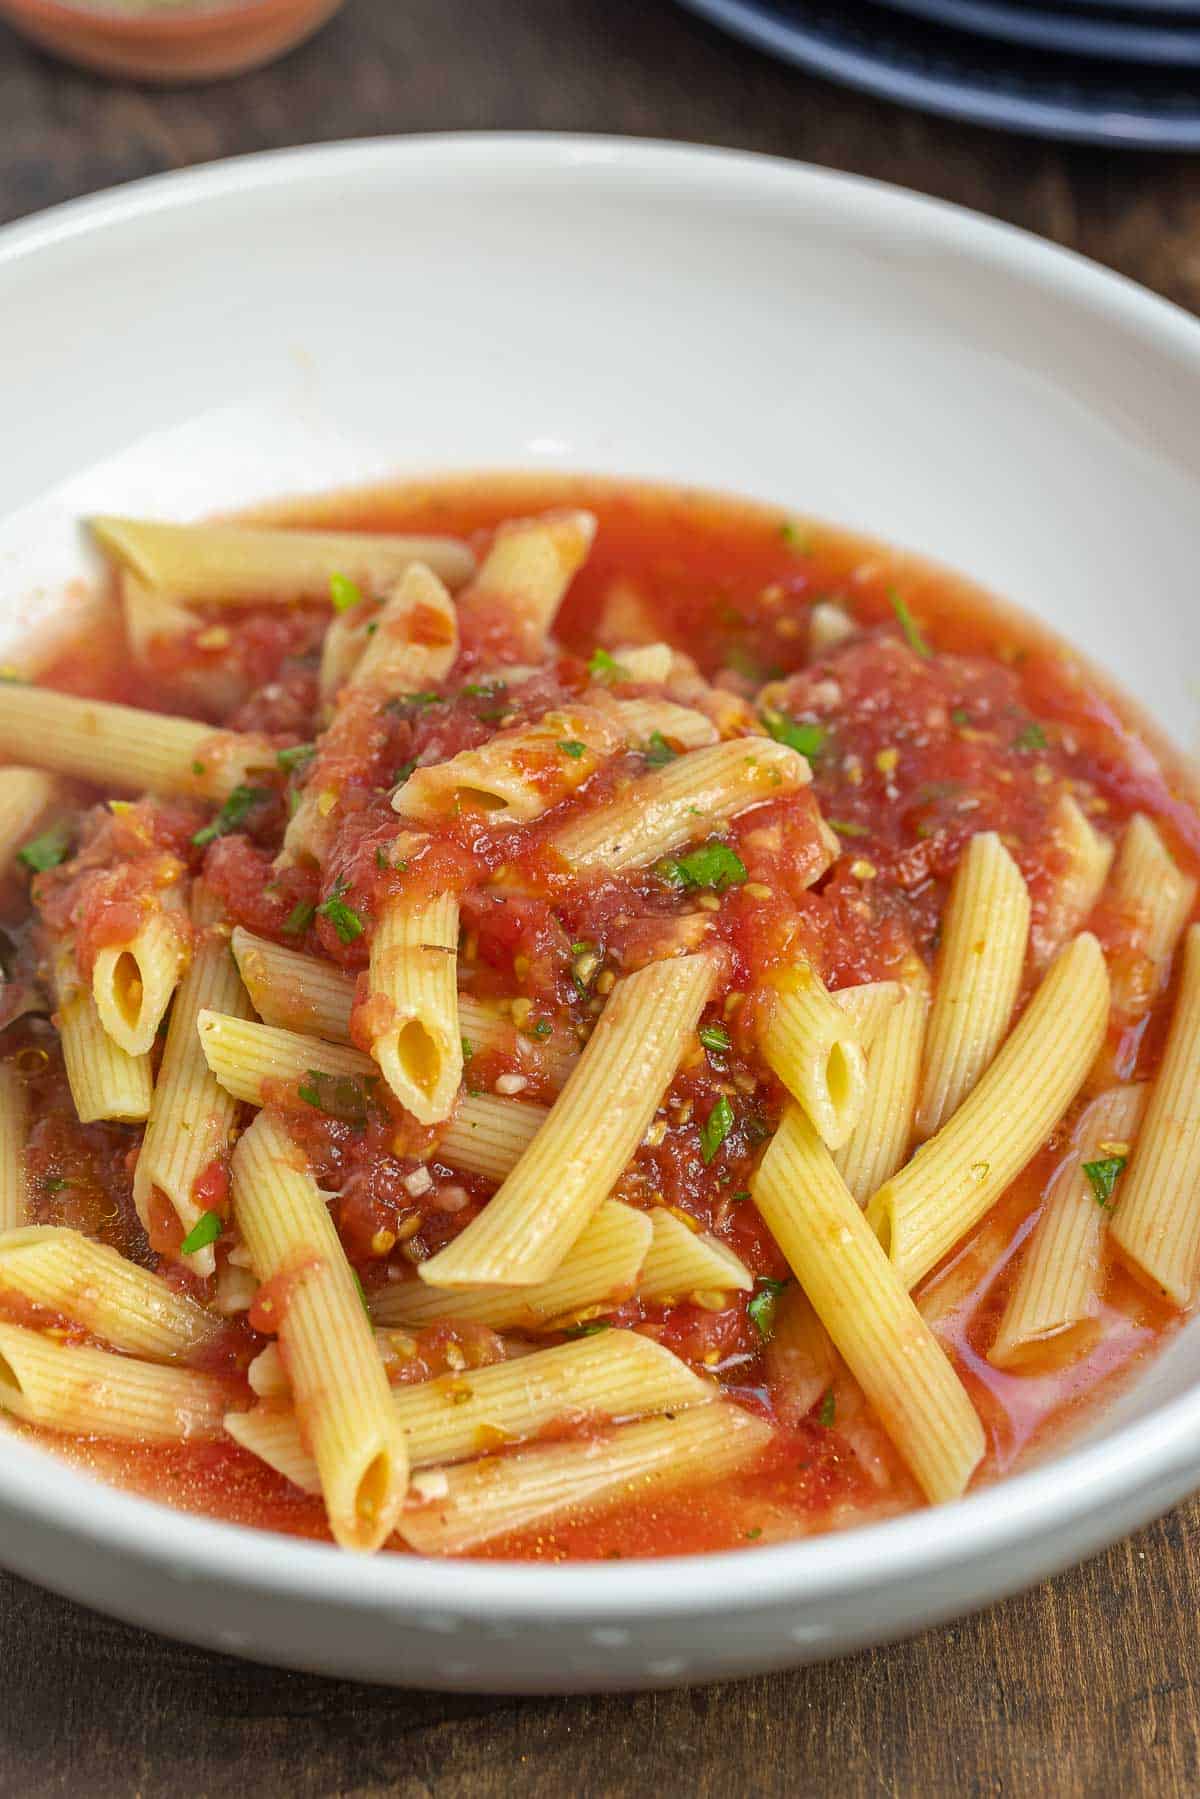 Simple Pomodoro Sauce - Food with Feeling